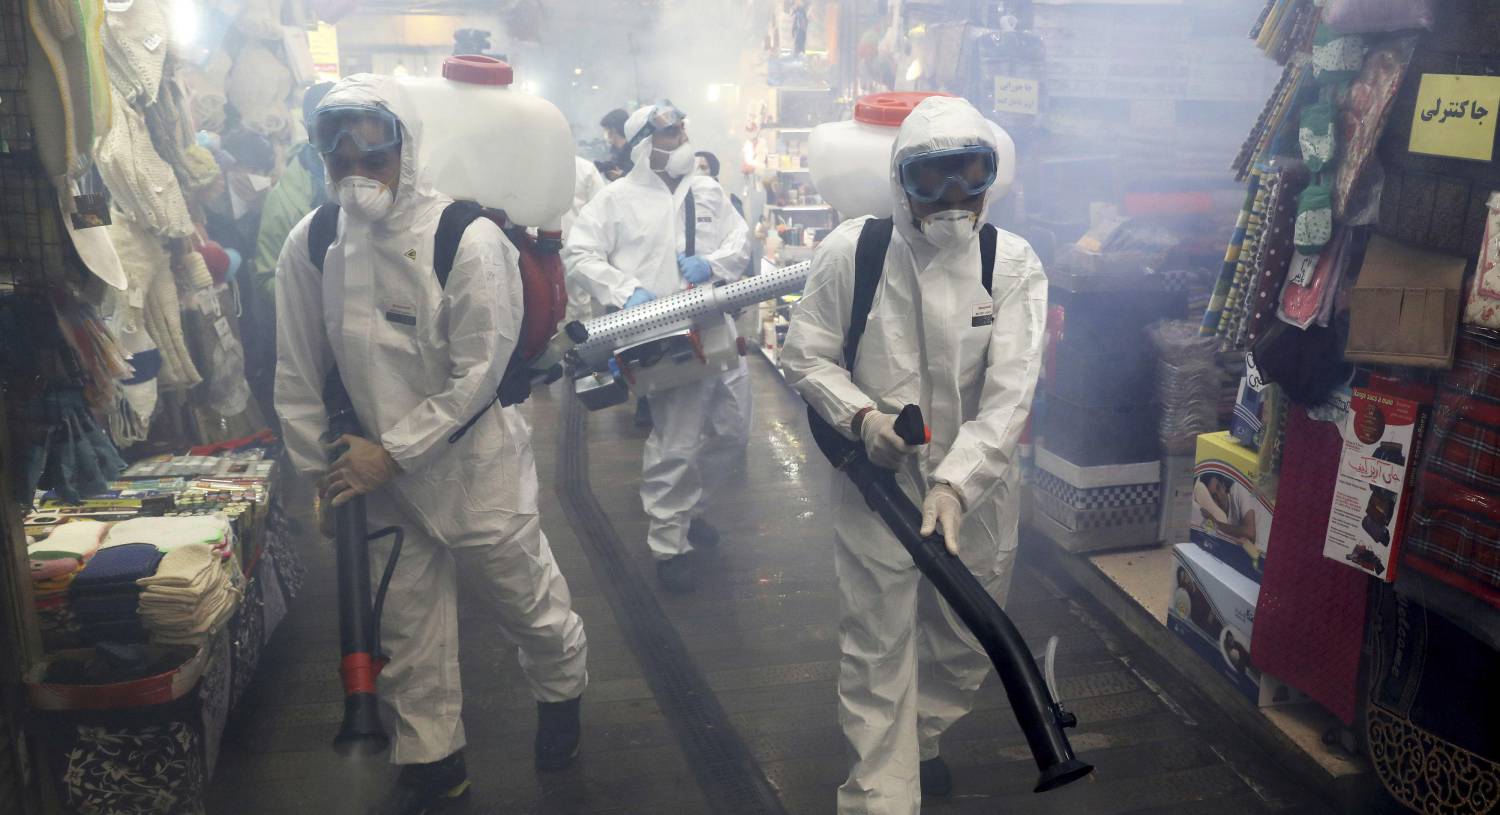 Firefighters disinfect a shopping centre in northern Tehran. Despite a potential second wave of coronavirus infections (new cases have averaged around 2,500 a day since the start of June) a new wave of arrests has targeted at least 77 Bahá’í’s. Picture: Ebrahim Noroozi/AP